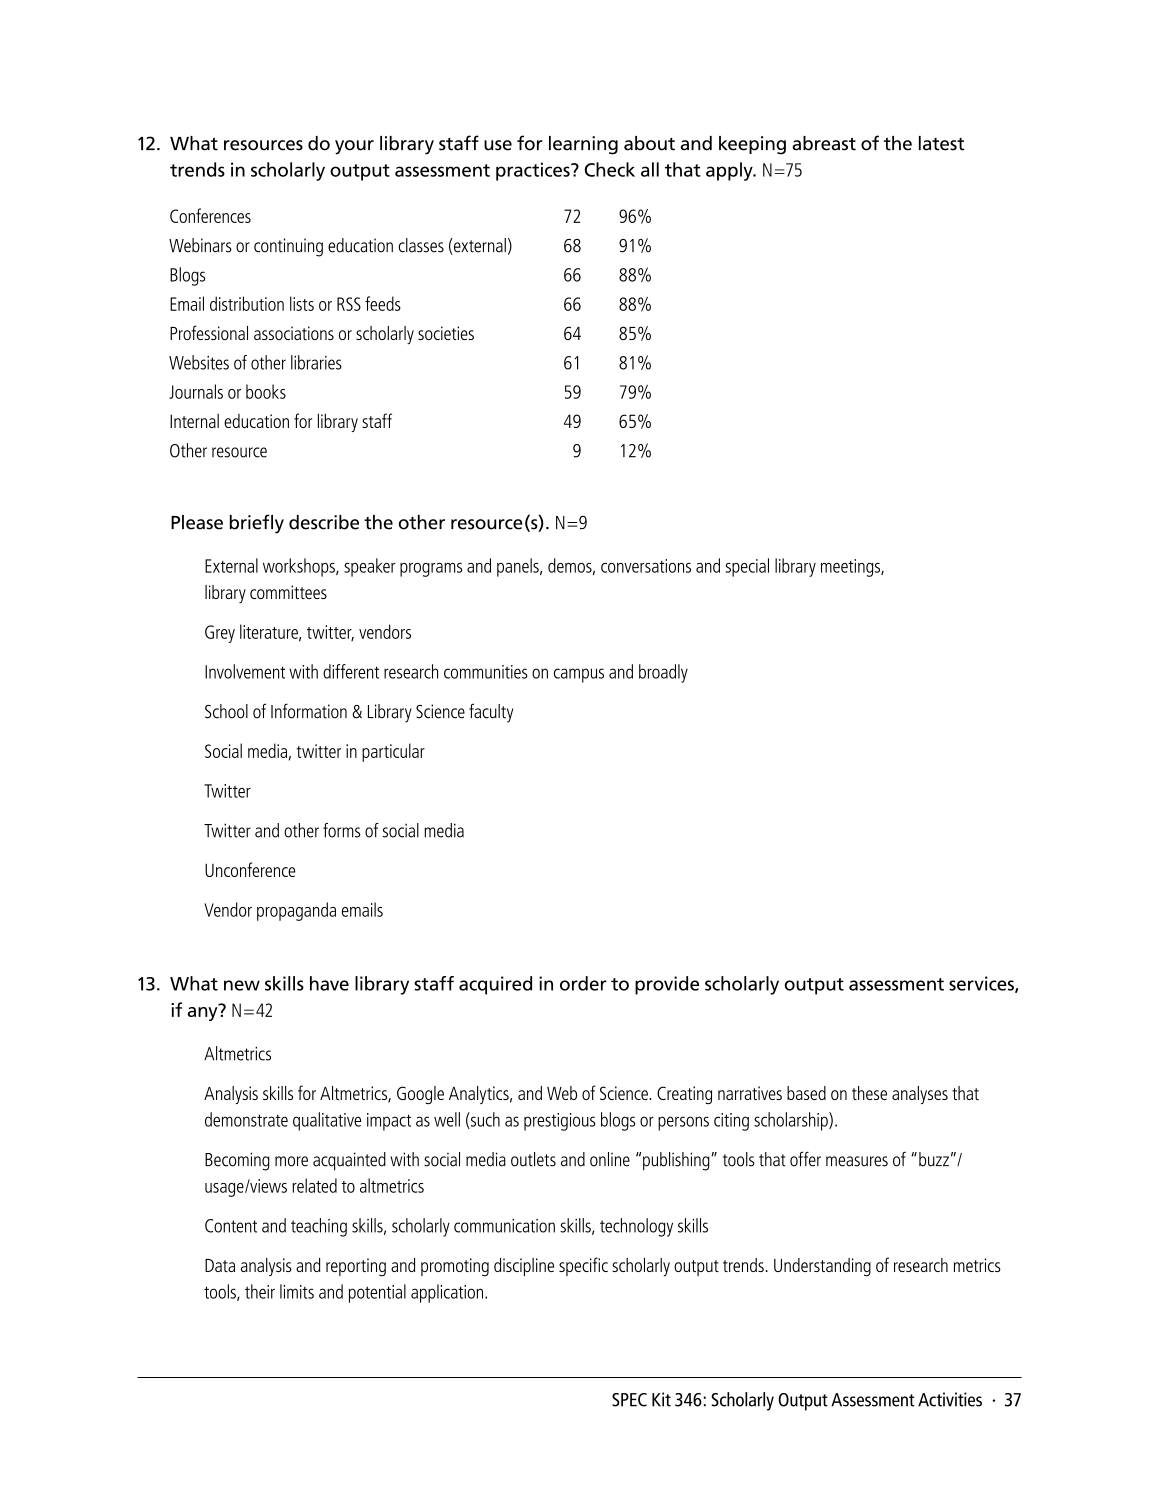 SPEC Kit 346: Scholarly Output Assessment Activities (May 2015) page 37